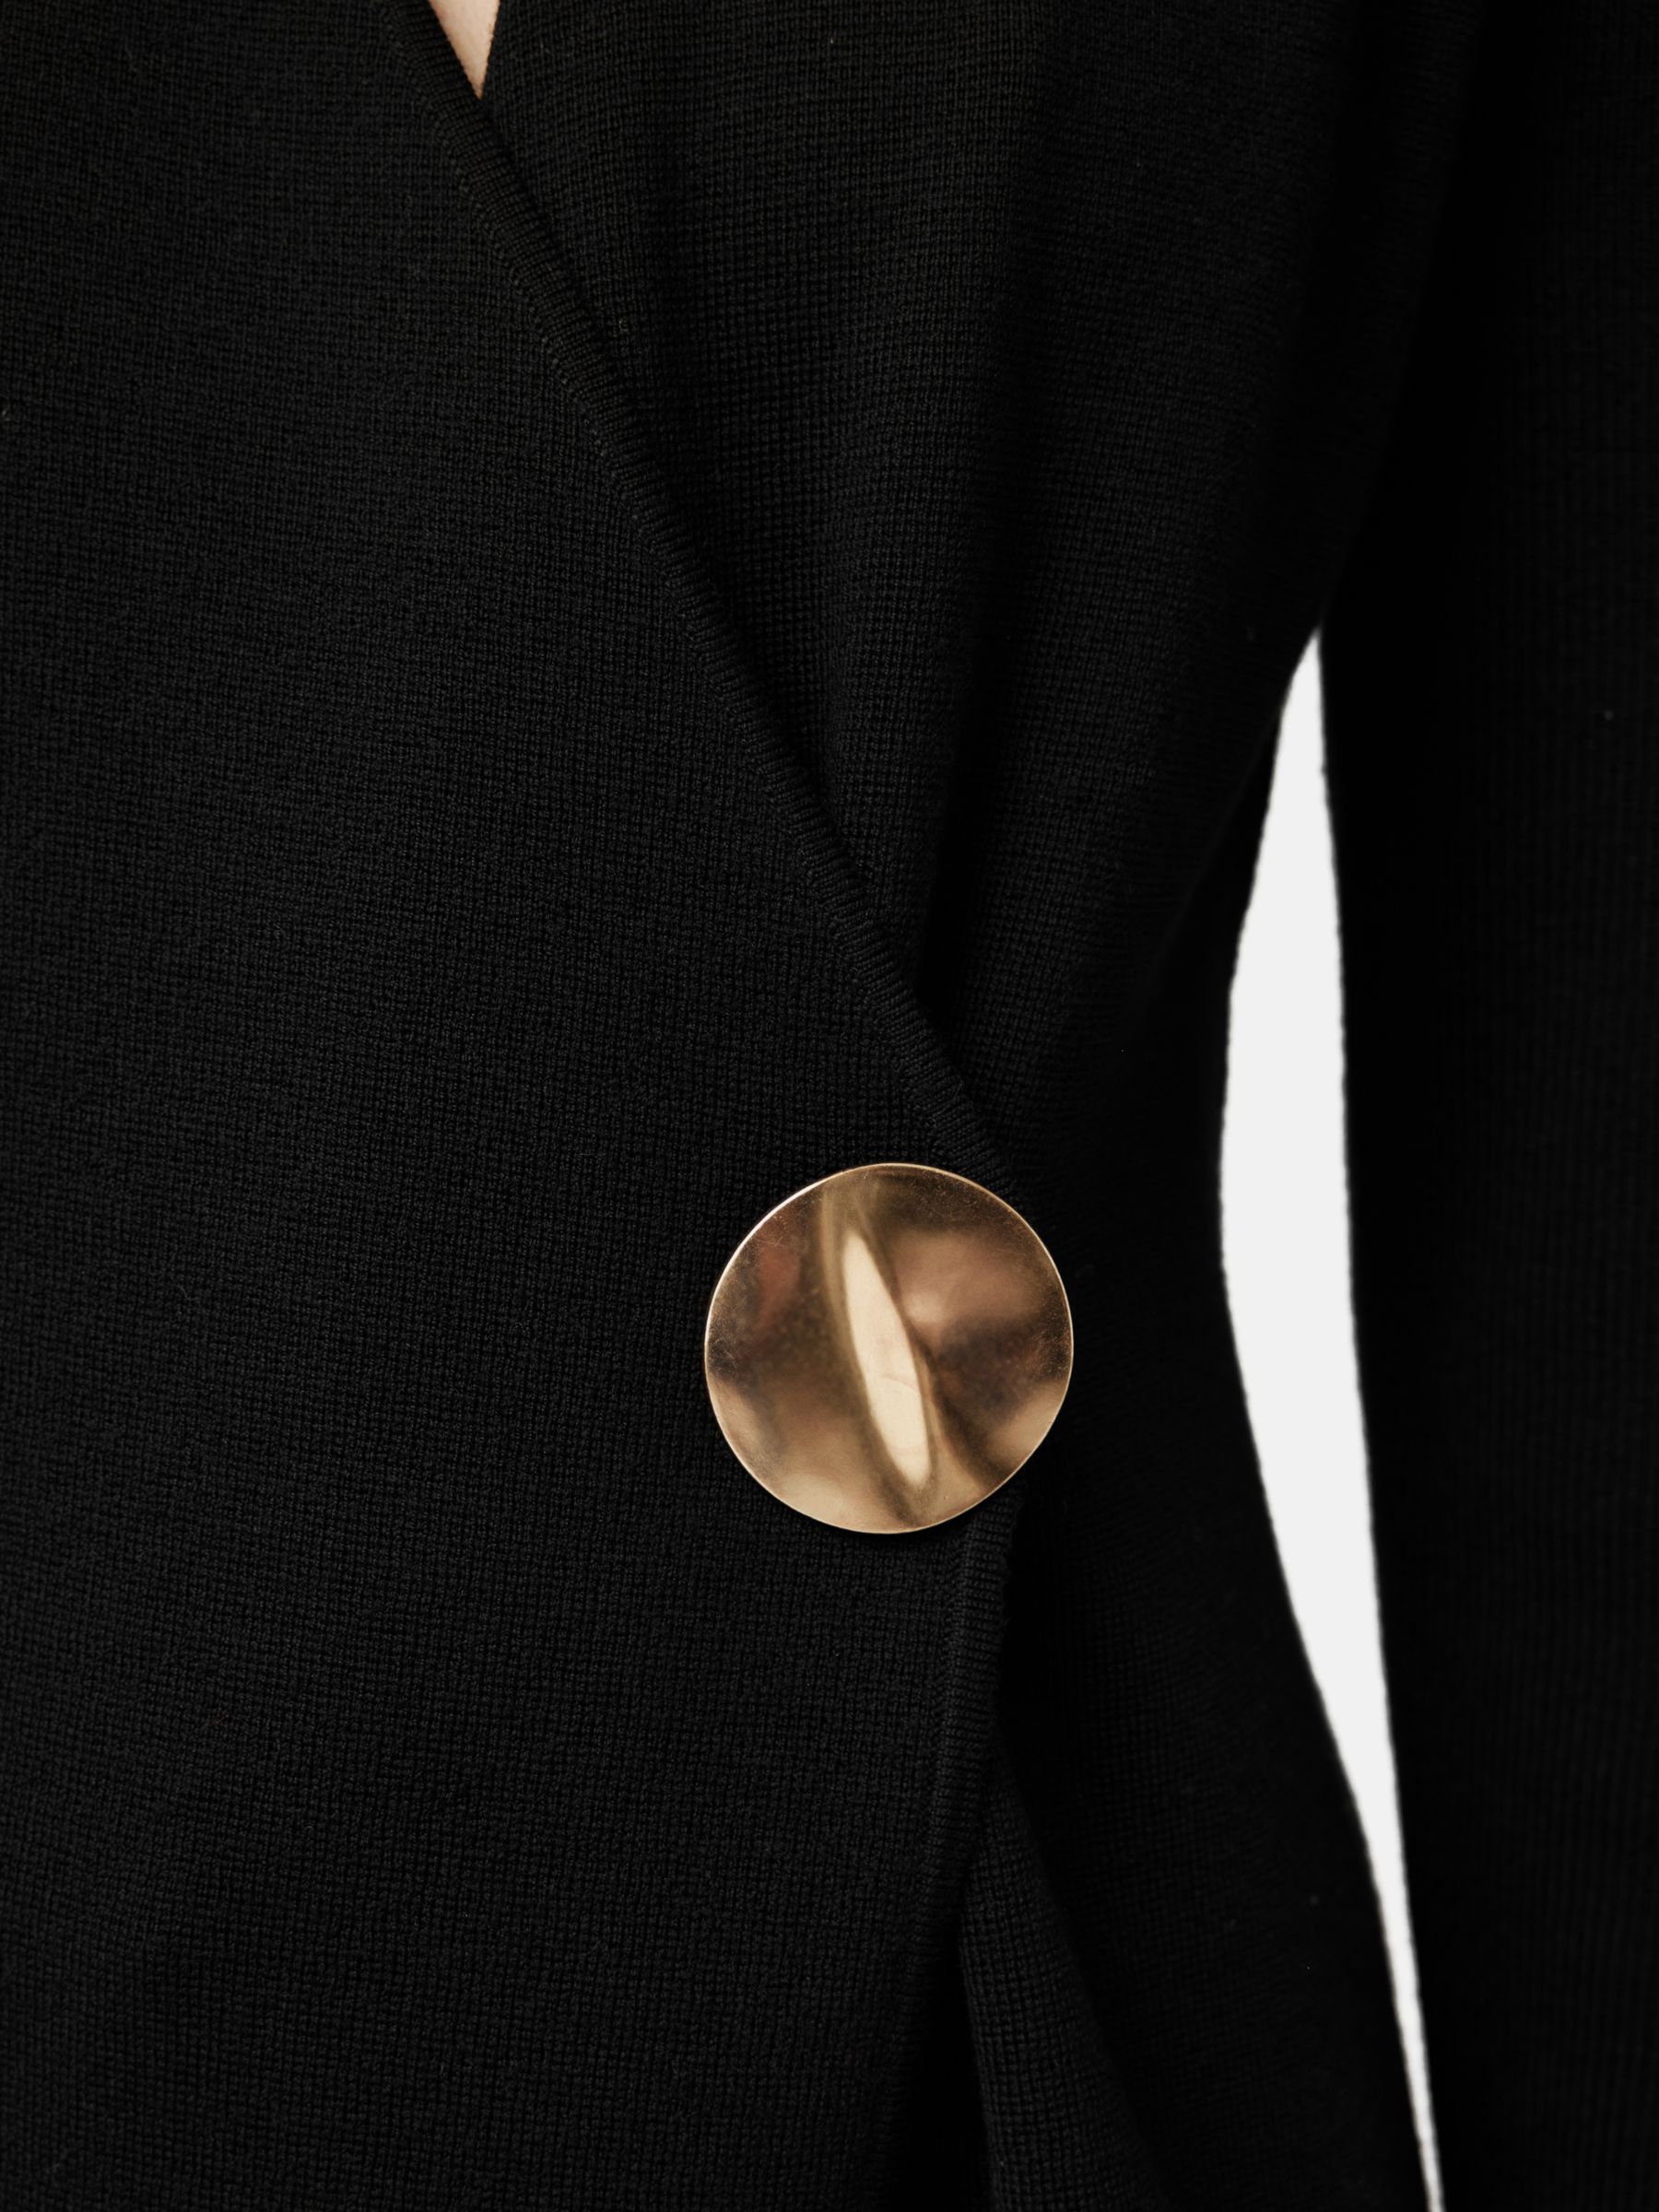 Buy Jigsaw Milano Gold Disc Knitted Jacket, Black Online at johnlewis.com